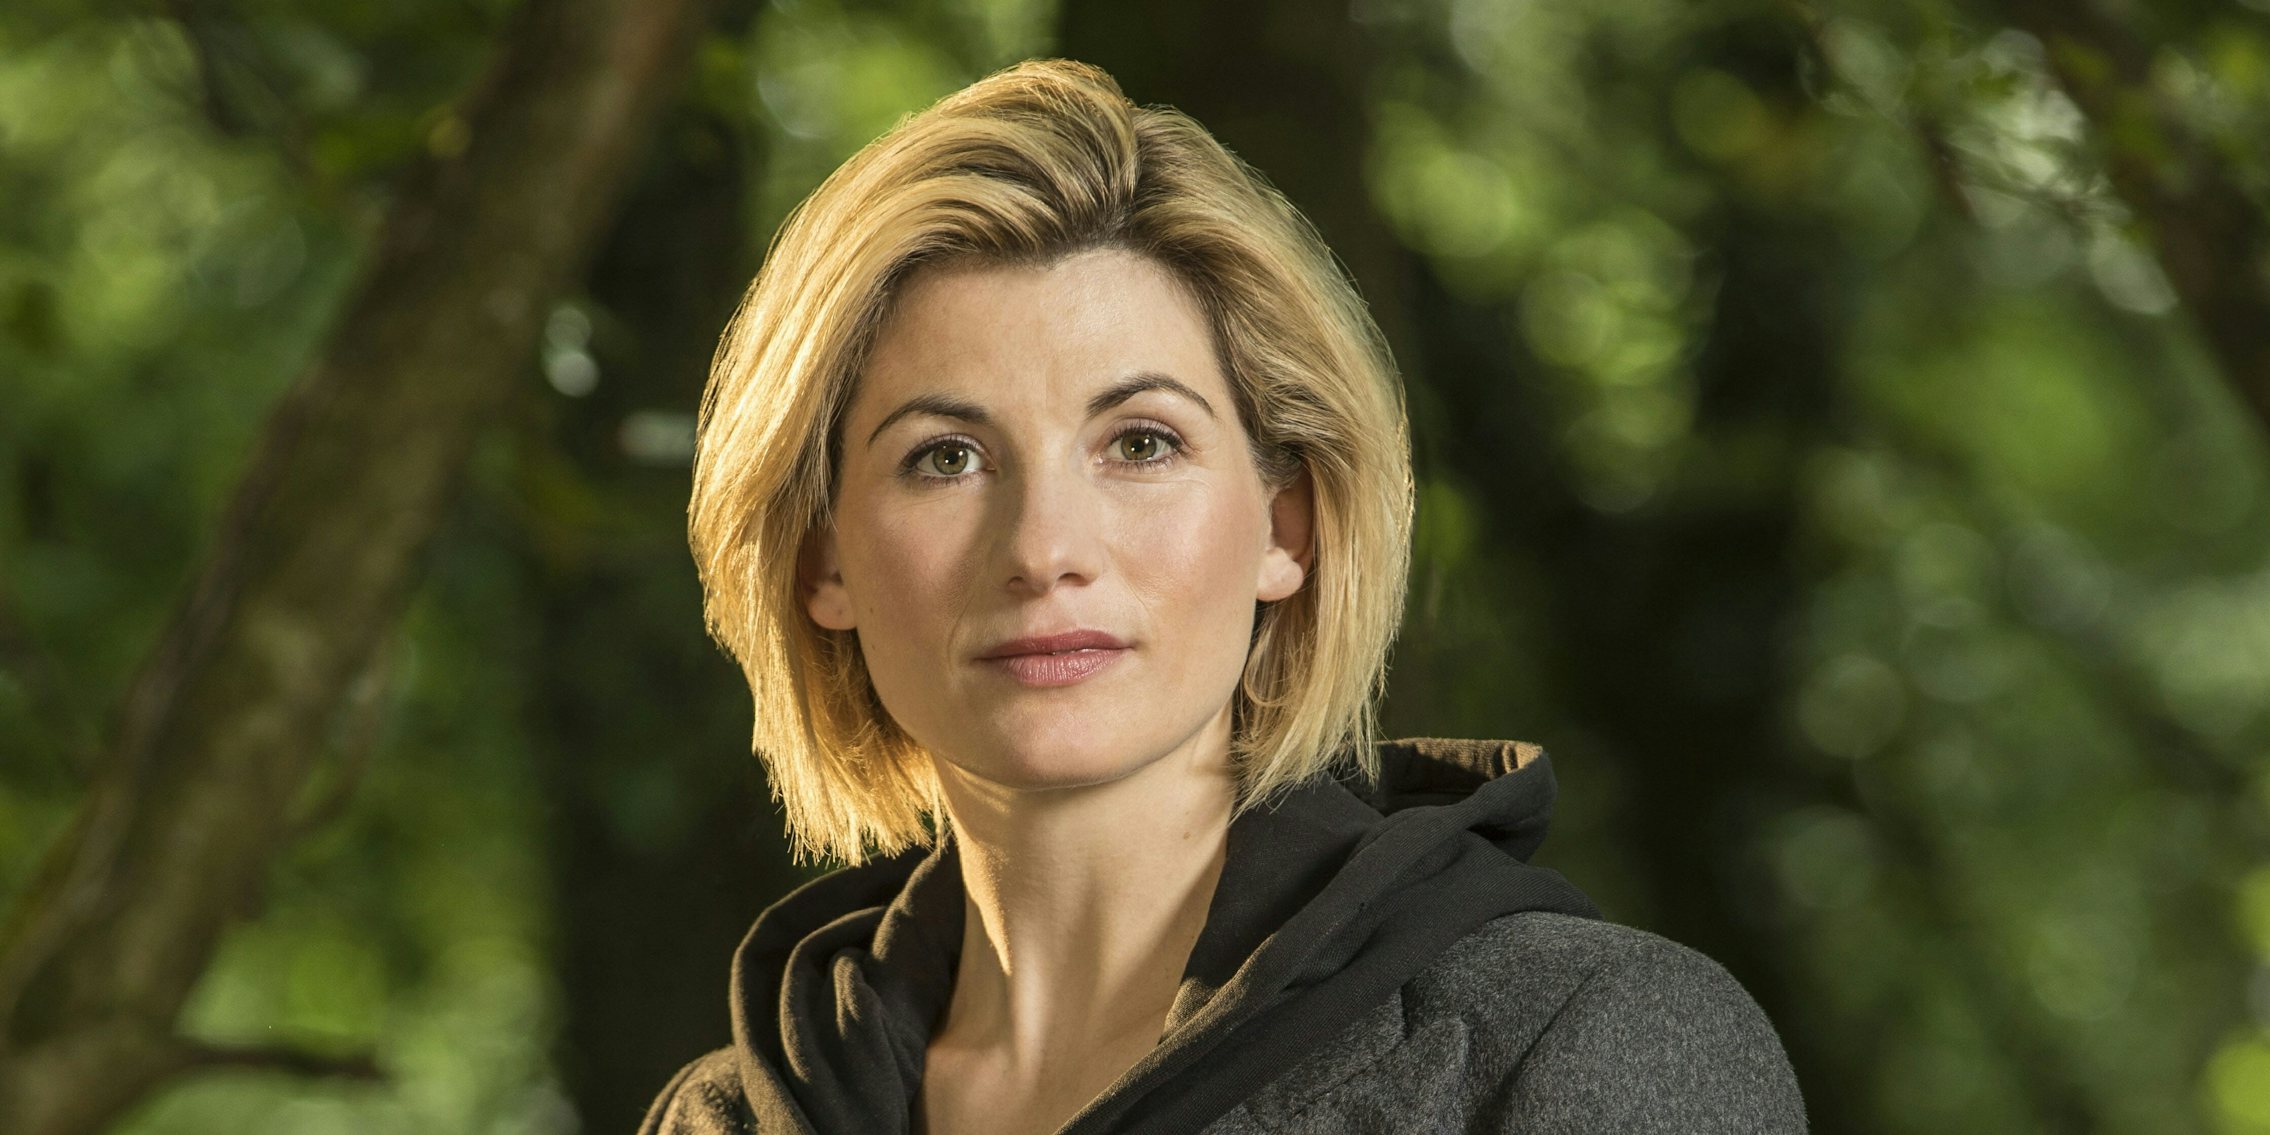 Doctor Who Season 11: We Finally Have a New Trailer!